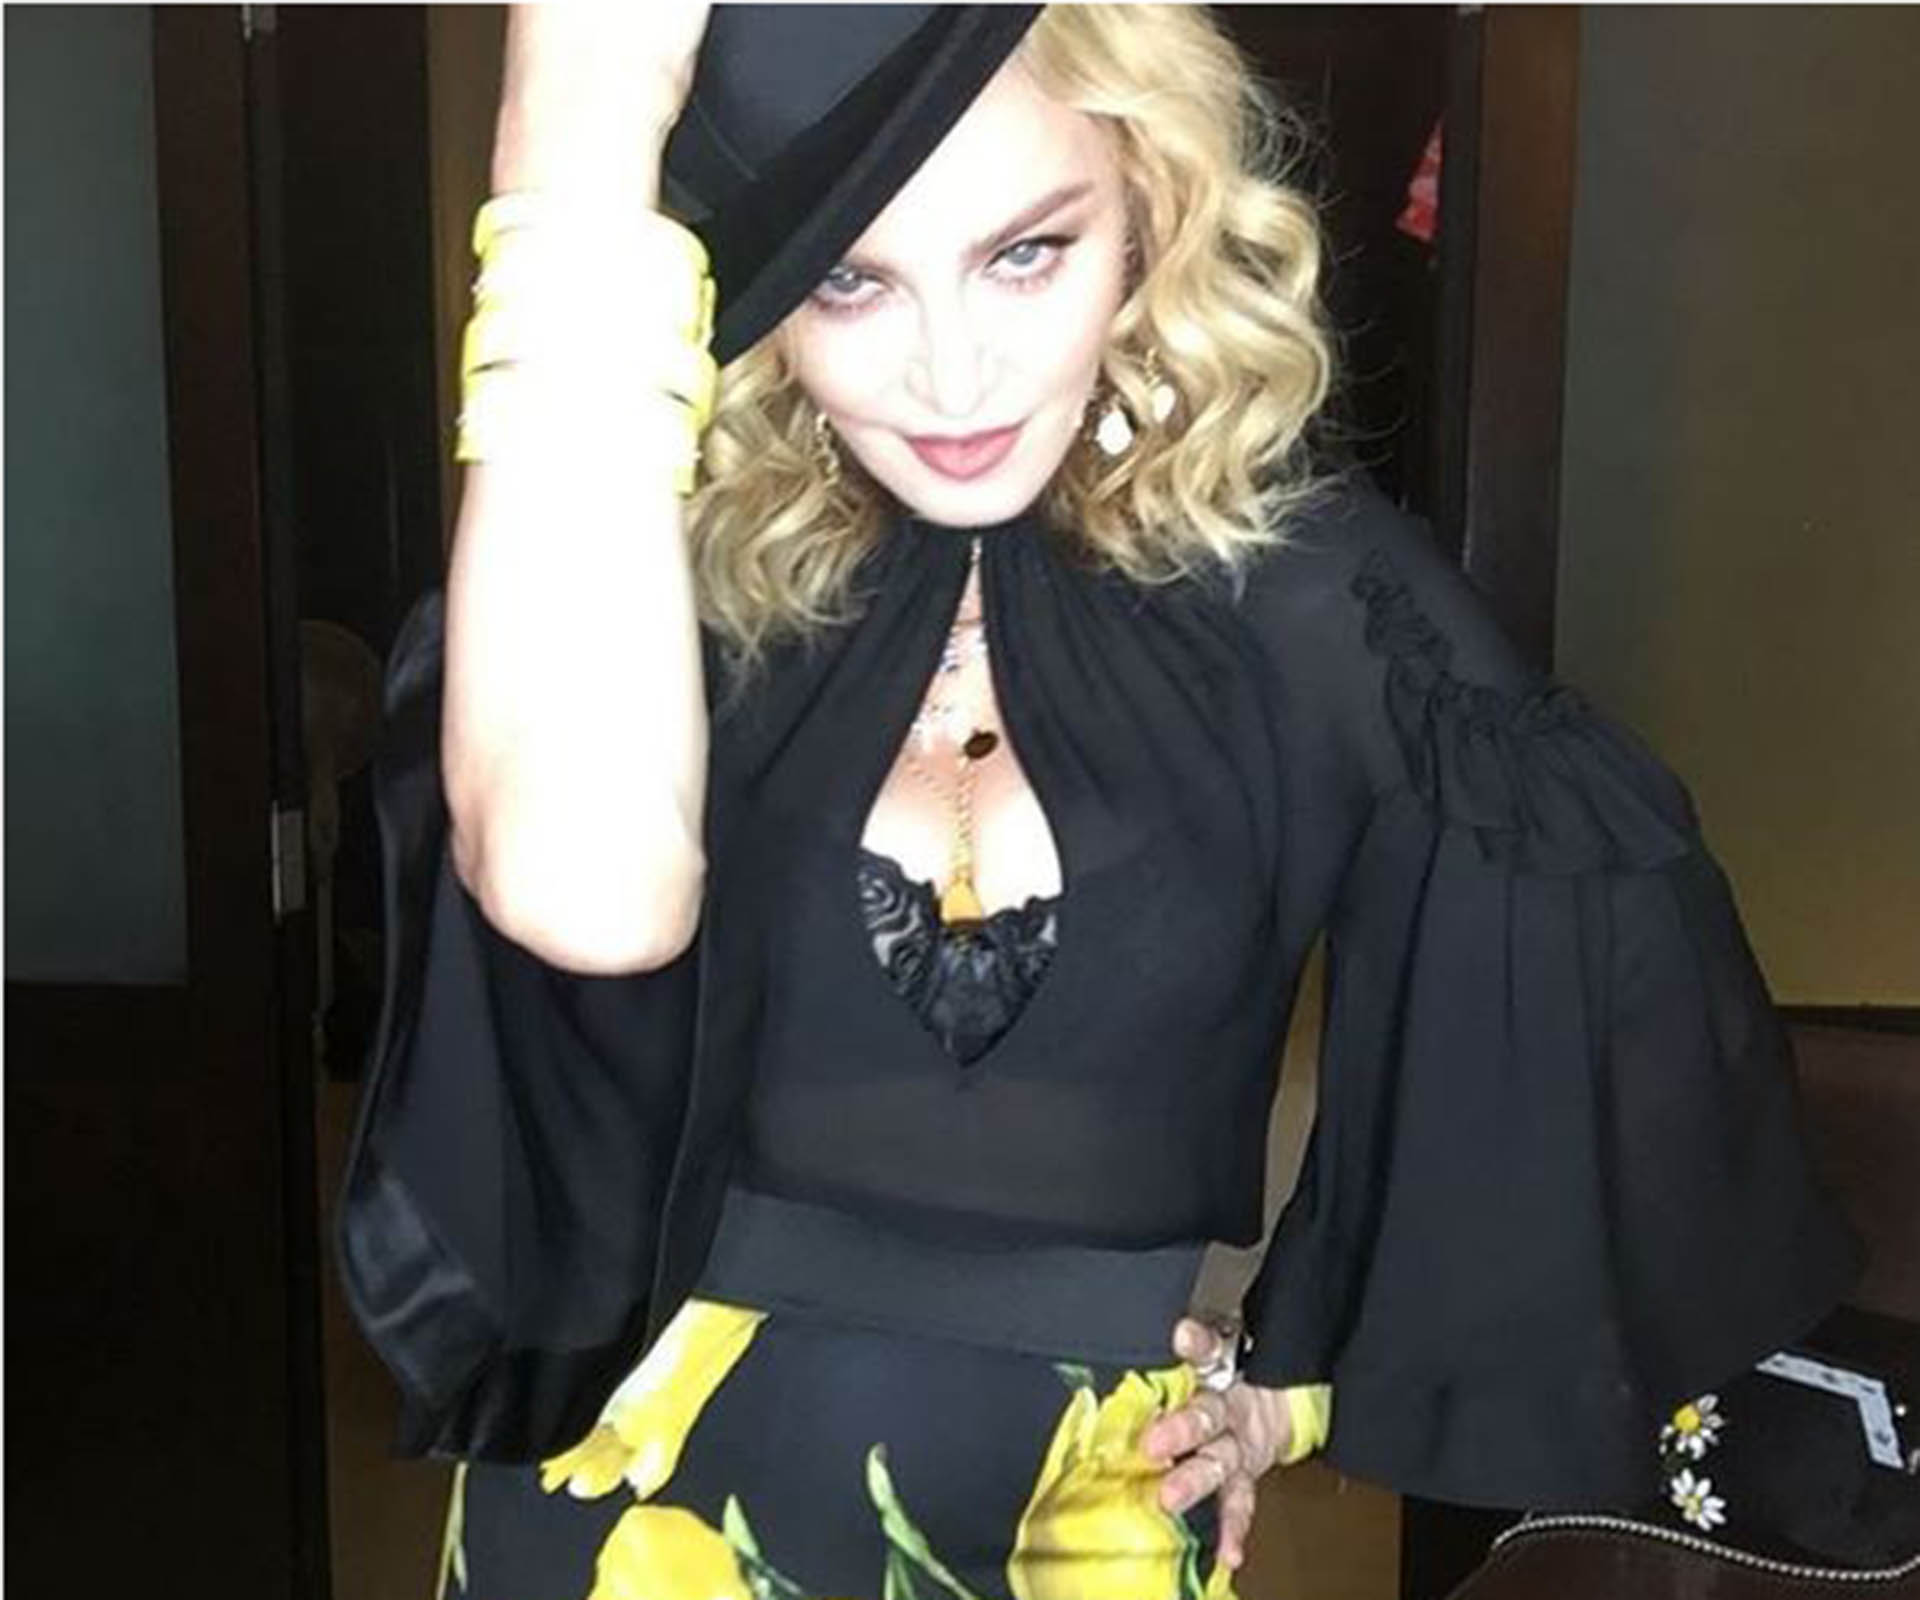 Madonna slams upcoming biopic: “Only I can tell my story”